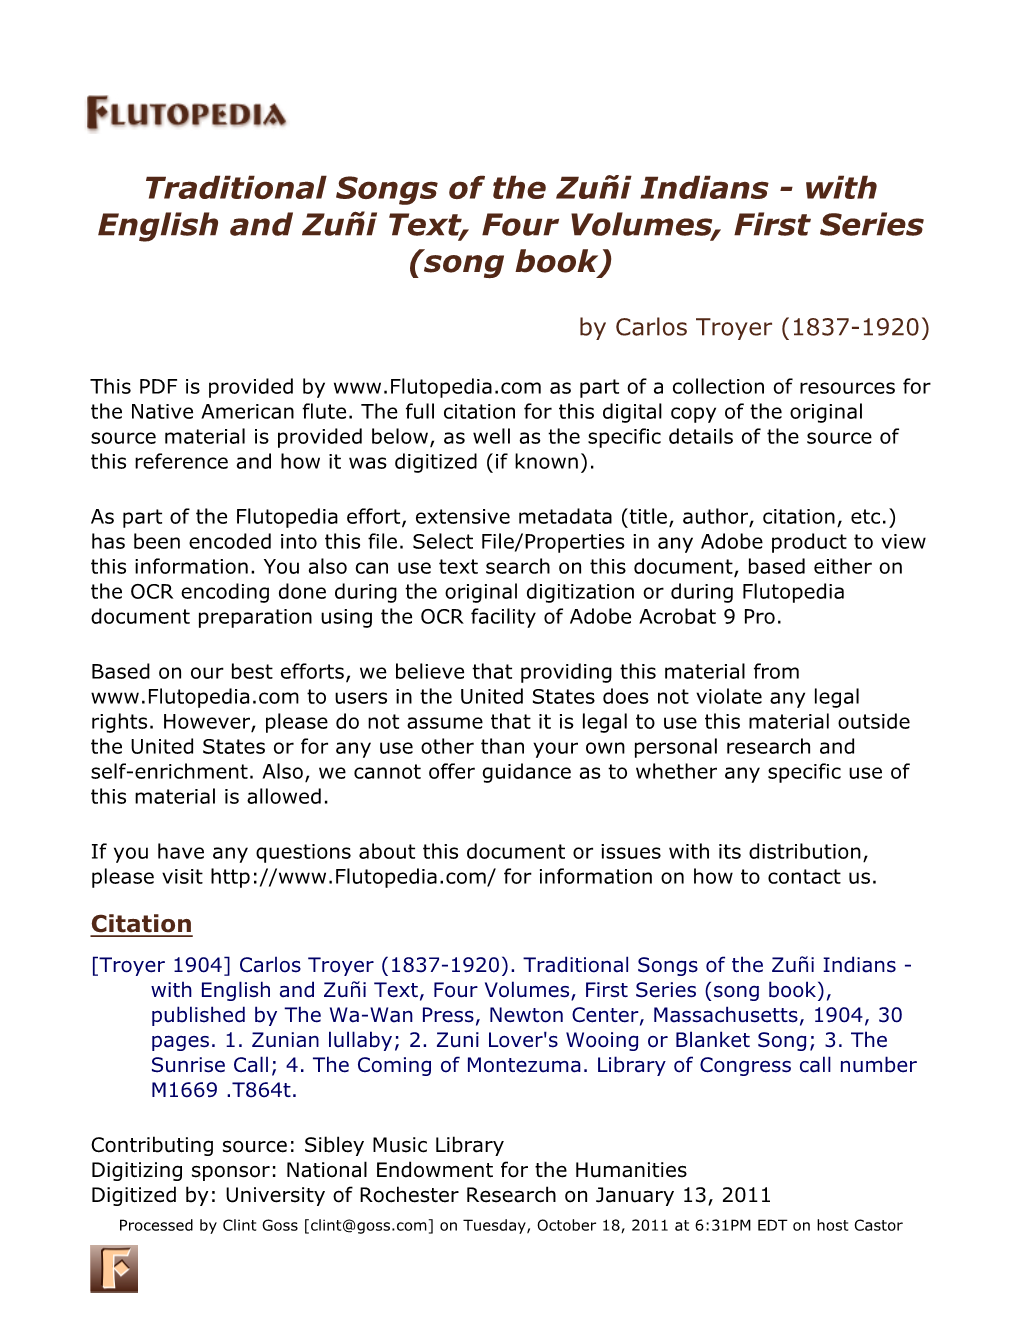 Traditional Songs of the Zuñi Indians - with English and Zuñi Text, Four Volumes, First Series (Song Book)